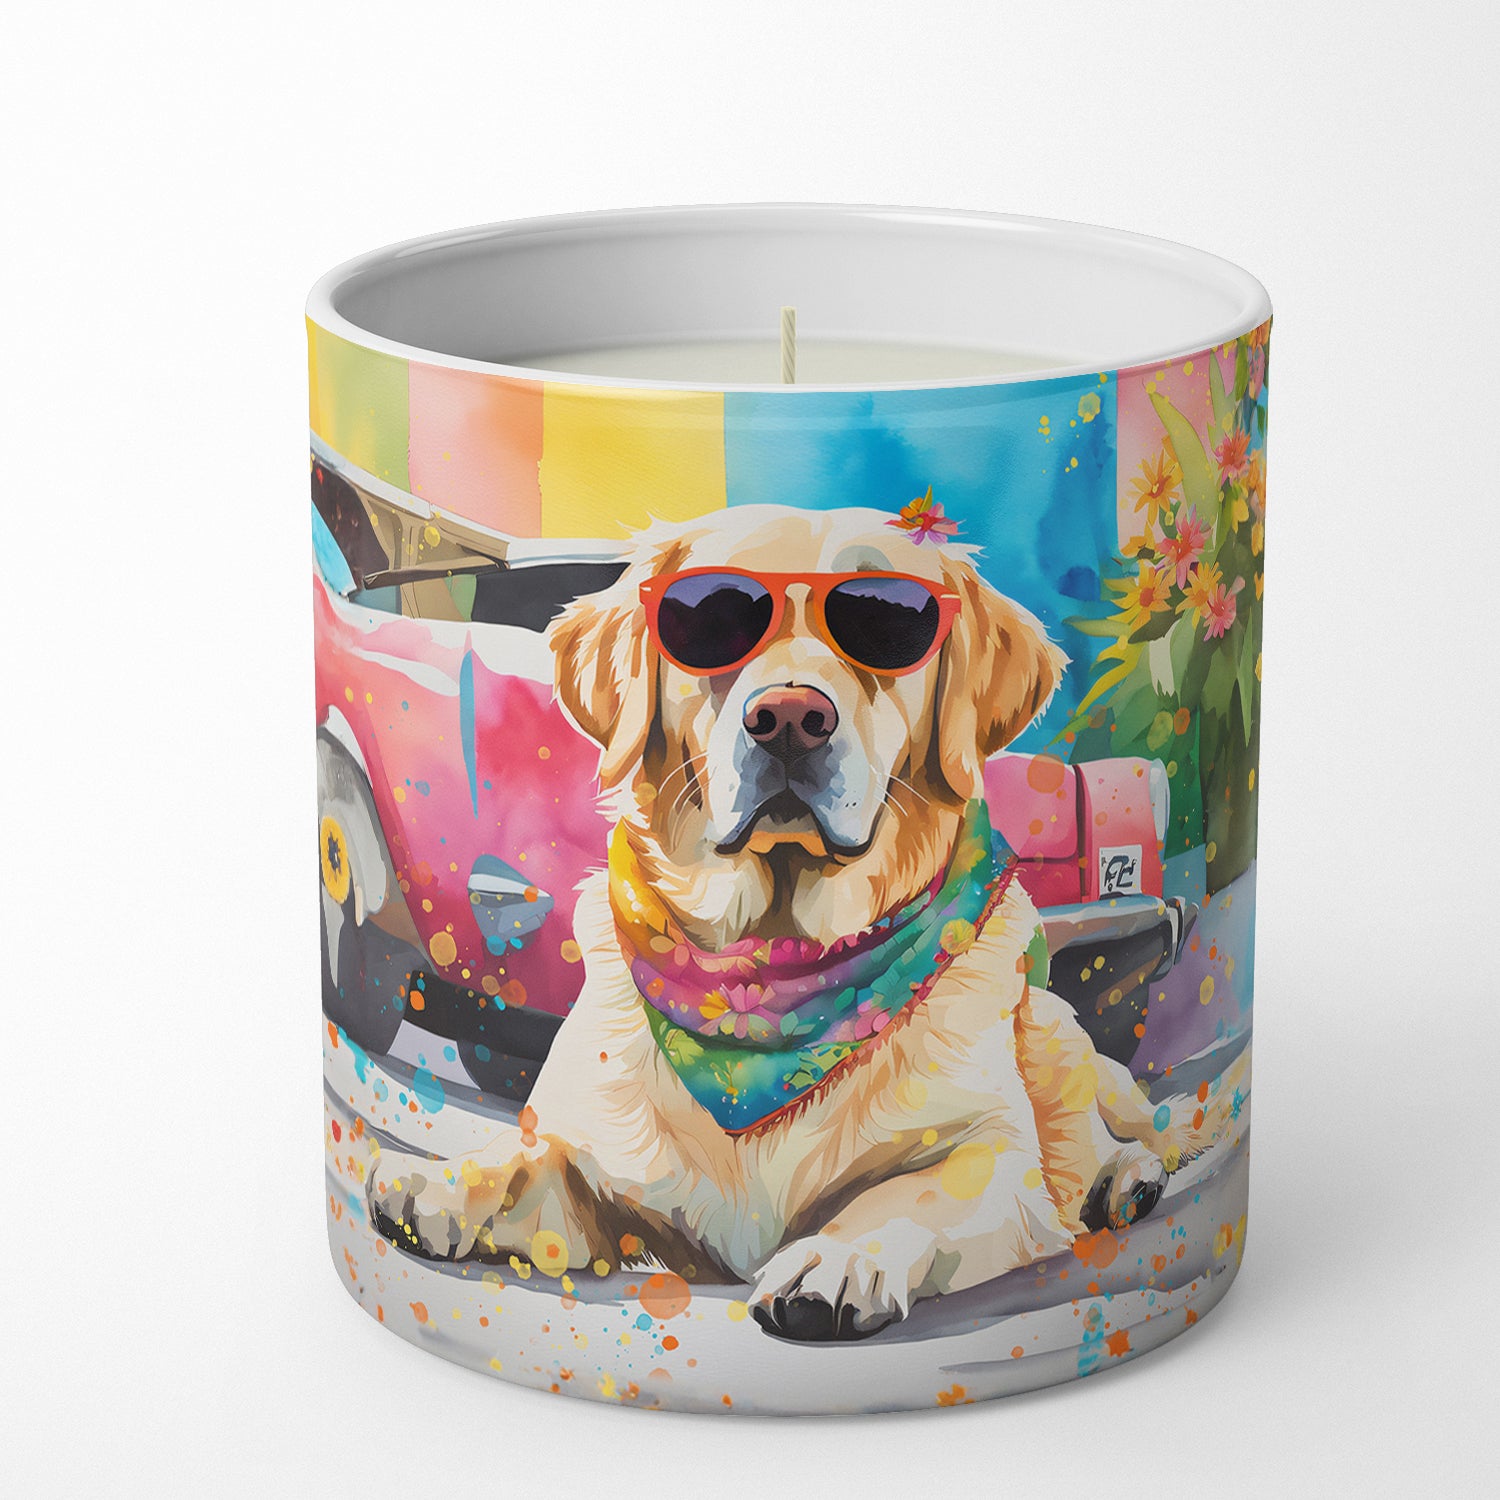 Buy this Yellow Labrador Hippie Dawg Decorative Soy Candle